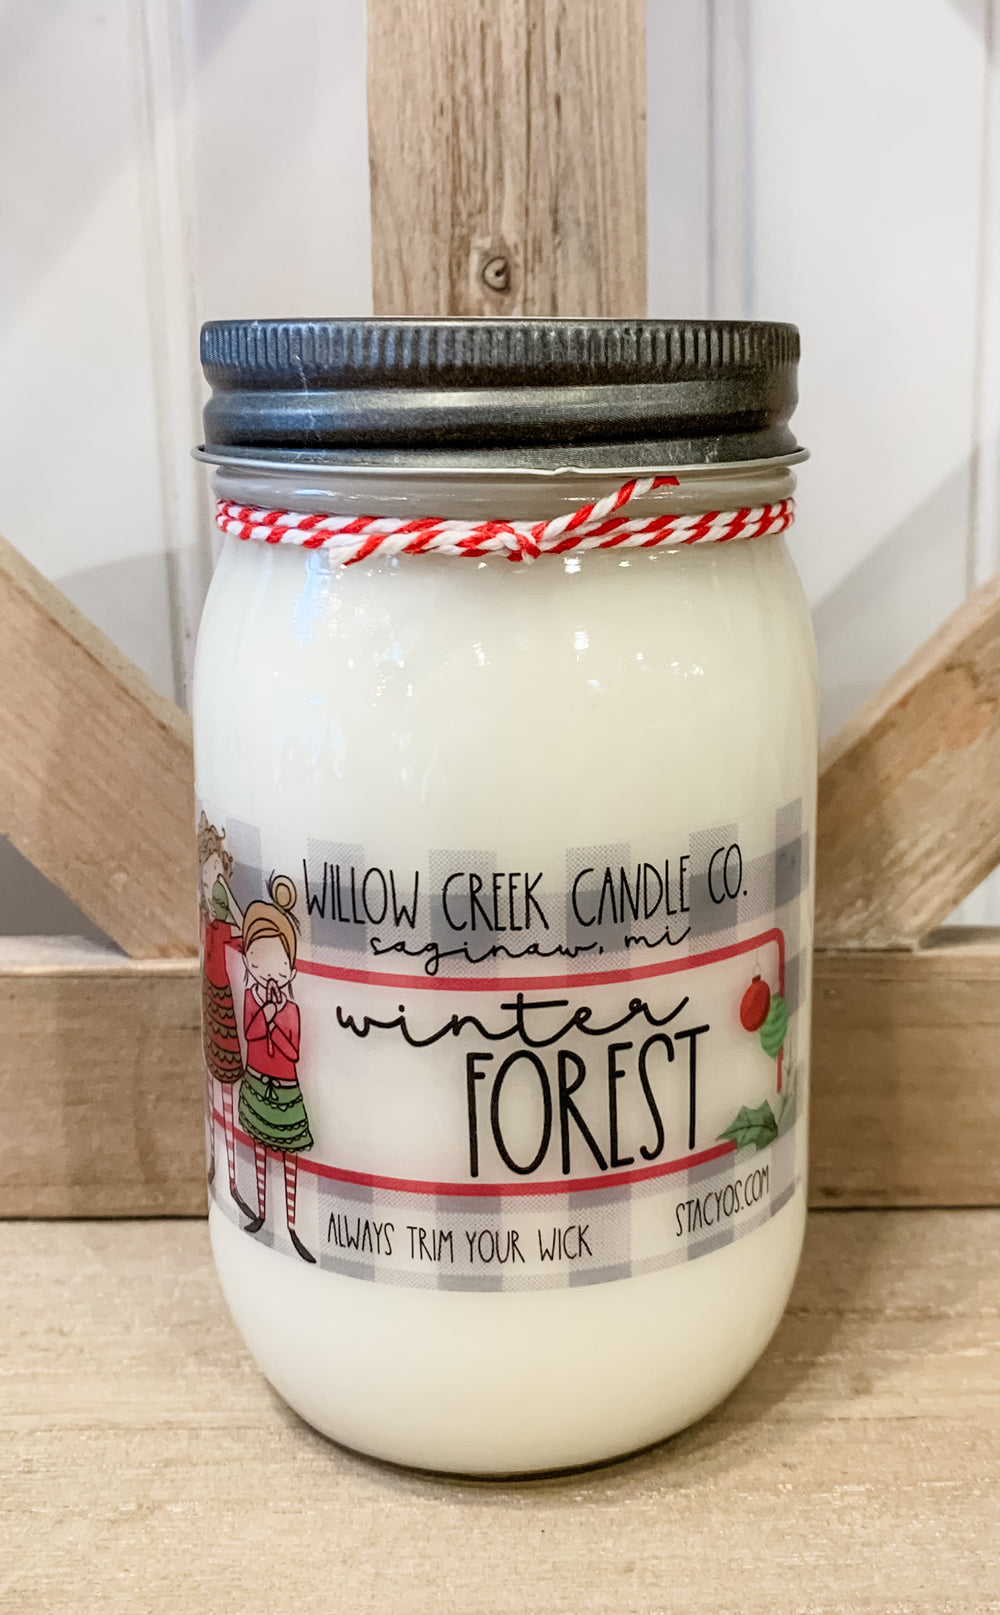 Willow Creek Winter Forest Candle